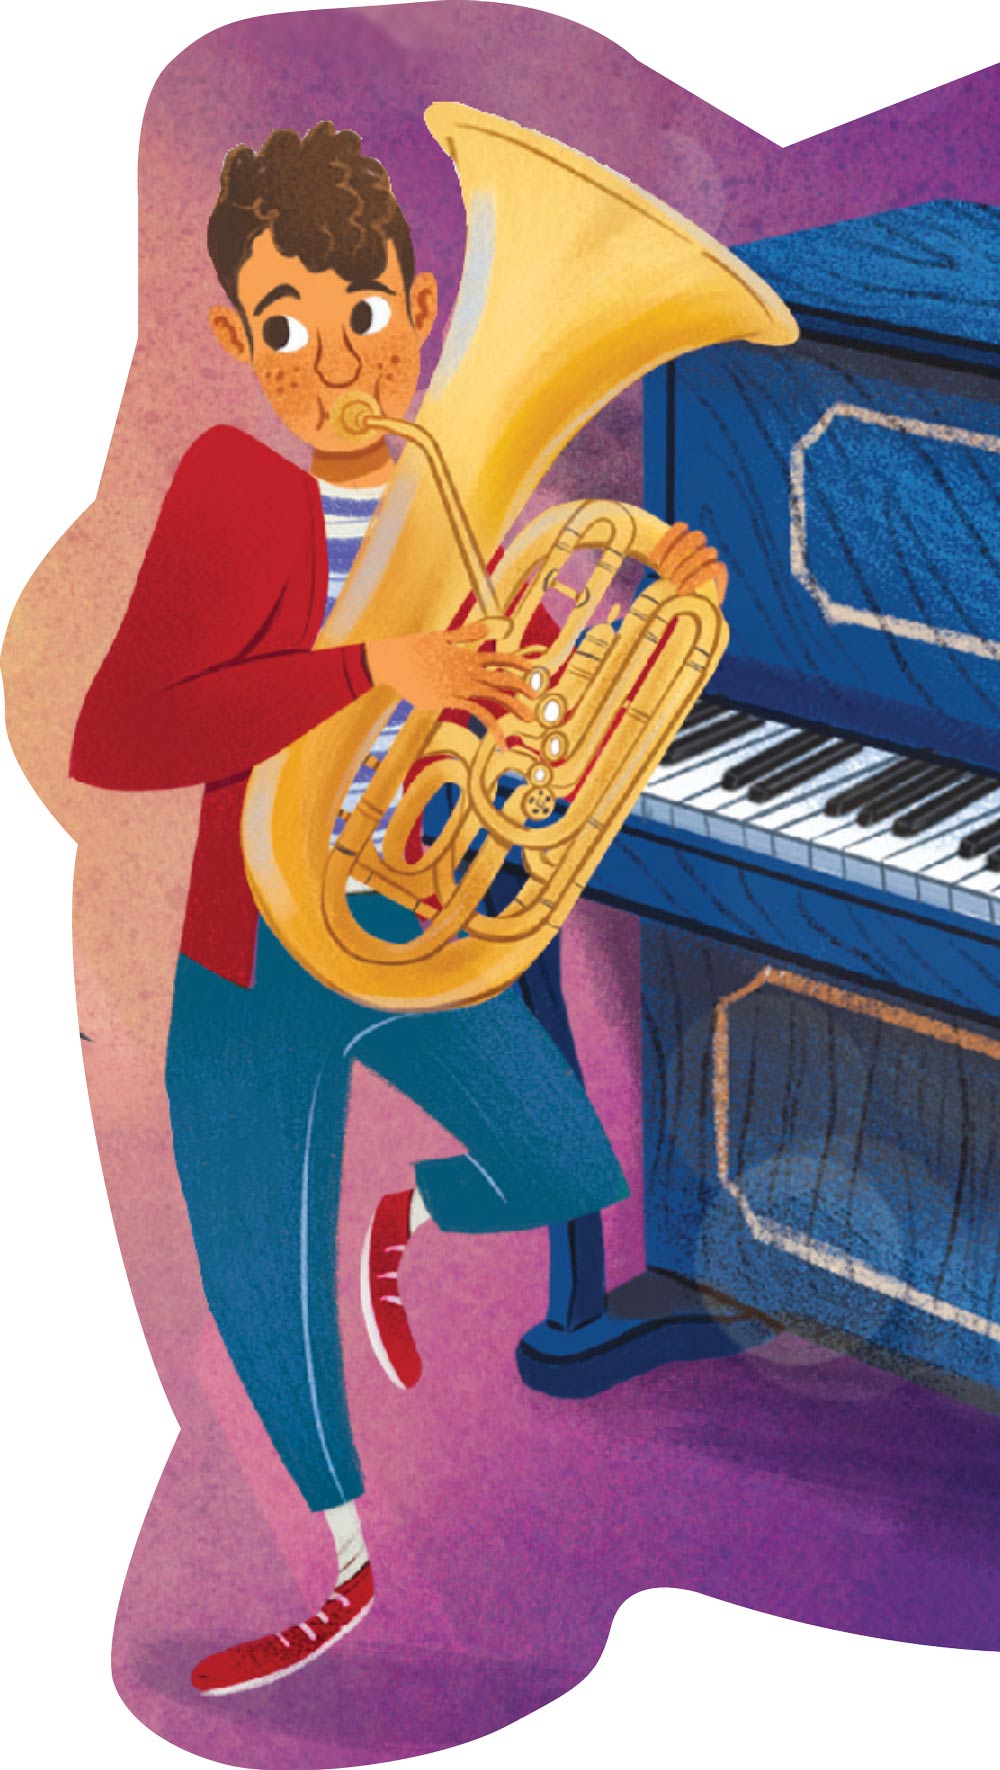 digital illustration of a person playing a tuba next to a piano